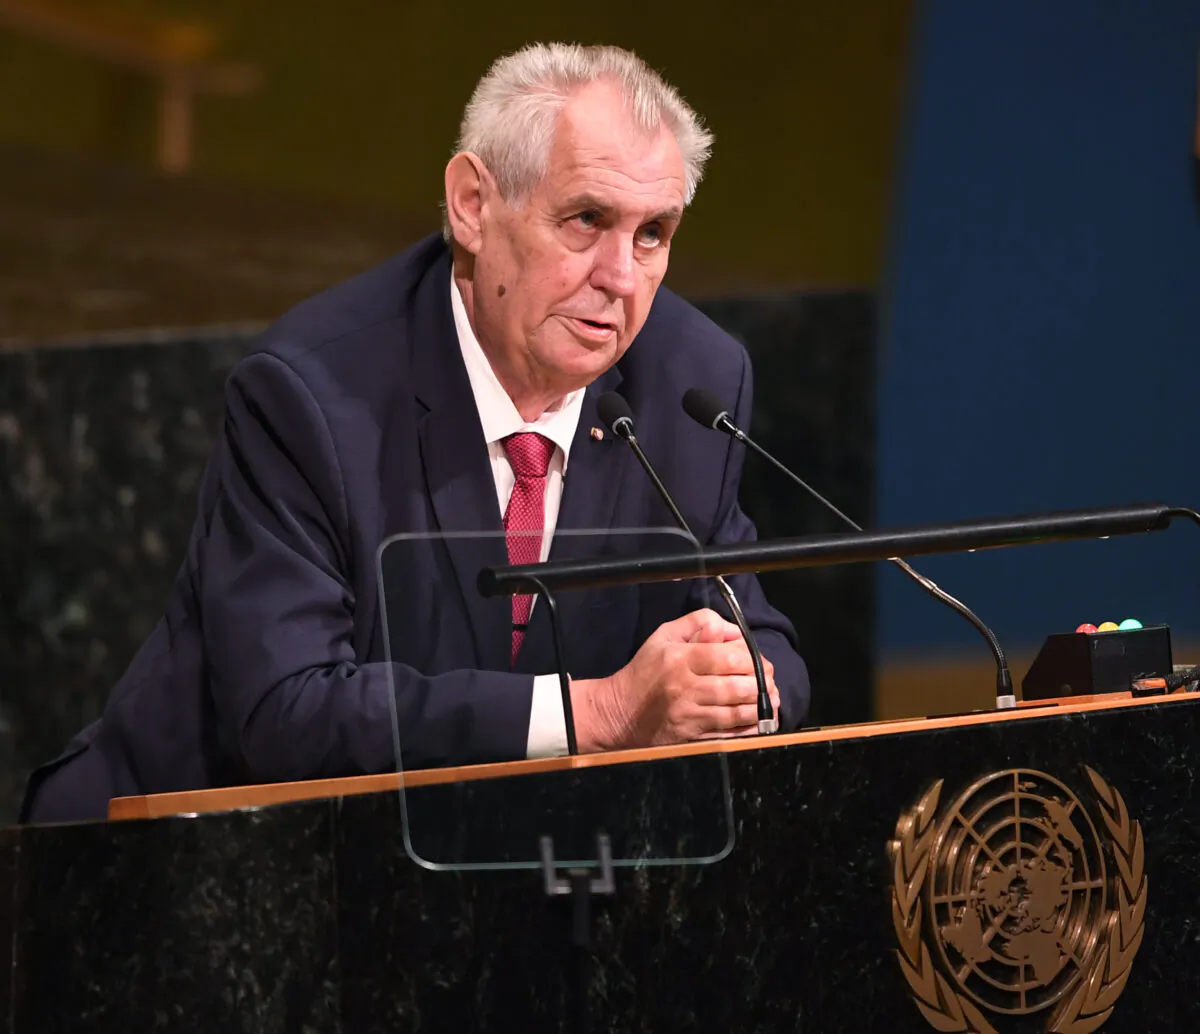 Milosh Zeman, president of the Czech Republic, addresses the 72nd session of the General Assembly at the United Nations in New York, on Sept. 19, 2017.  (Don Emmert/AFP/Getty Images)